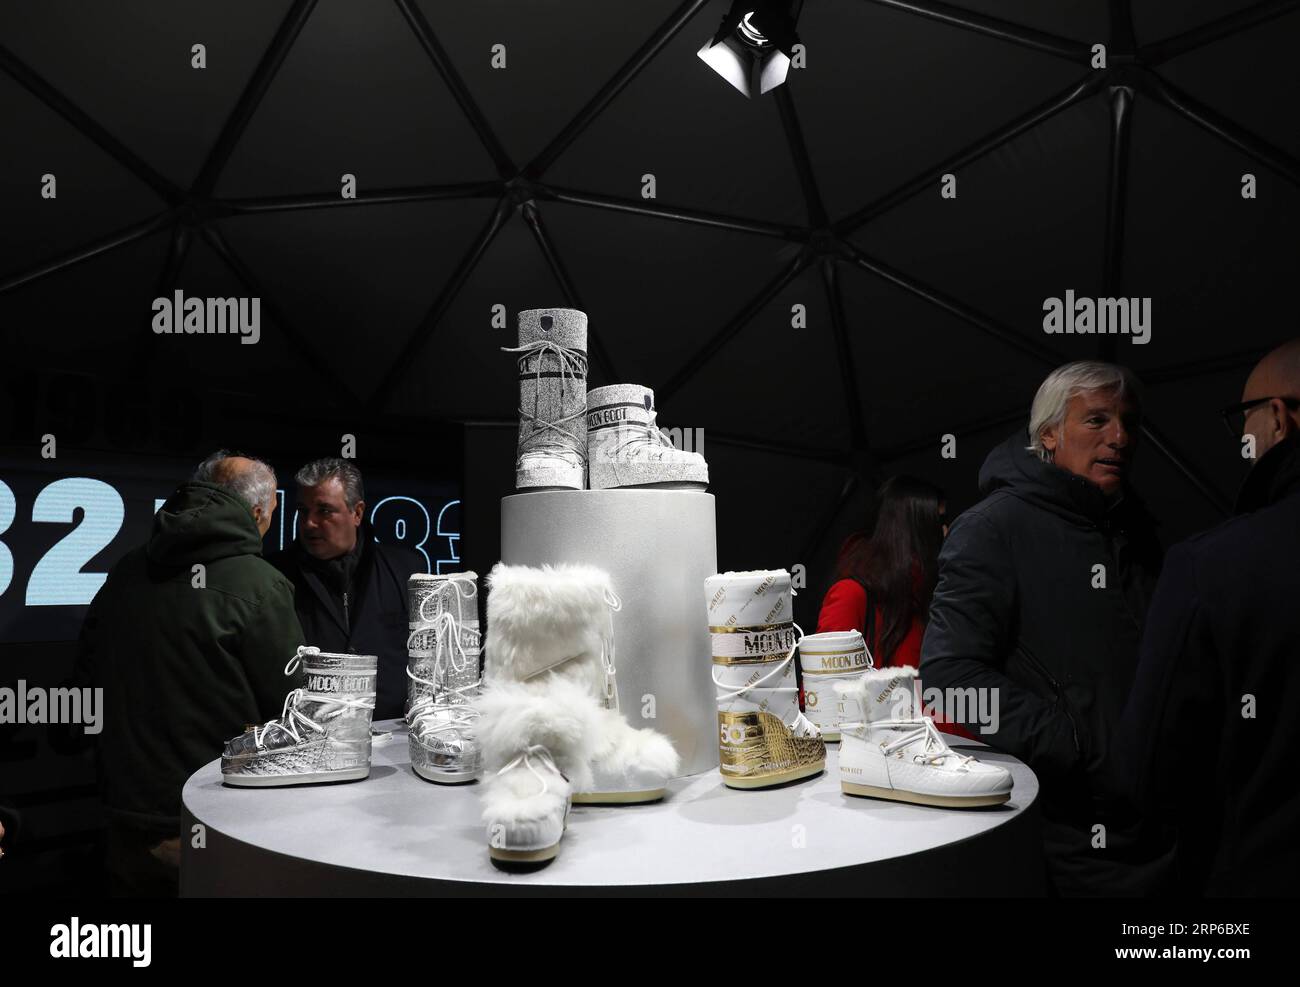 (190108) -- FLORENCE (ITALY), Jan. 8, 2019 -- People visit the 95th Pitti Immagine Uomo exhibition in Florence, Italy, Jan. 8, 2019. The exhibition, one of the world s most important platforms for men s clothing and accessory collections, is held here from Jan. 8 to 11. ) ITALY-FLORENCE-MEN S CLOTHING AND ACCESSORY-EXHIBITION ChengxTingting PUBLICATIONxNOTxINxCHN Stock Photo